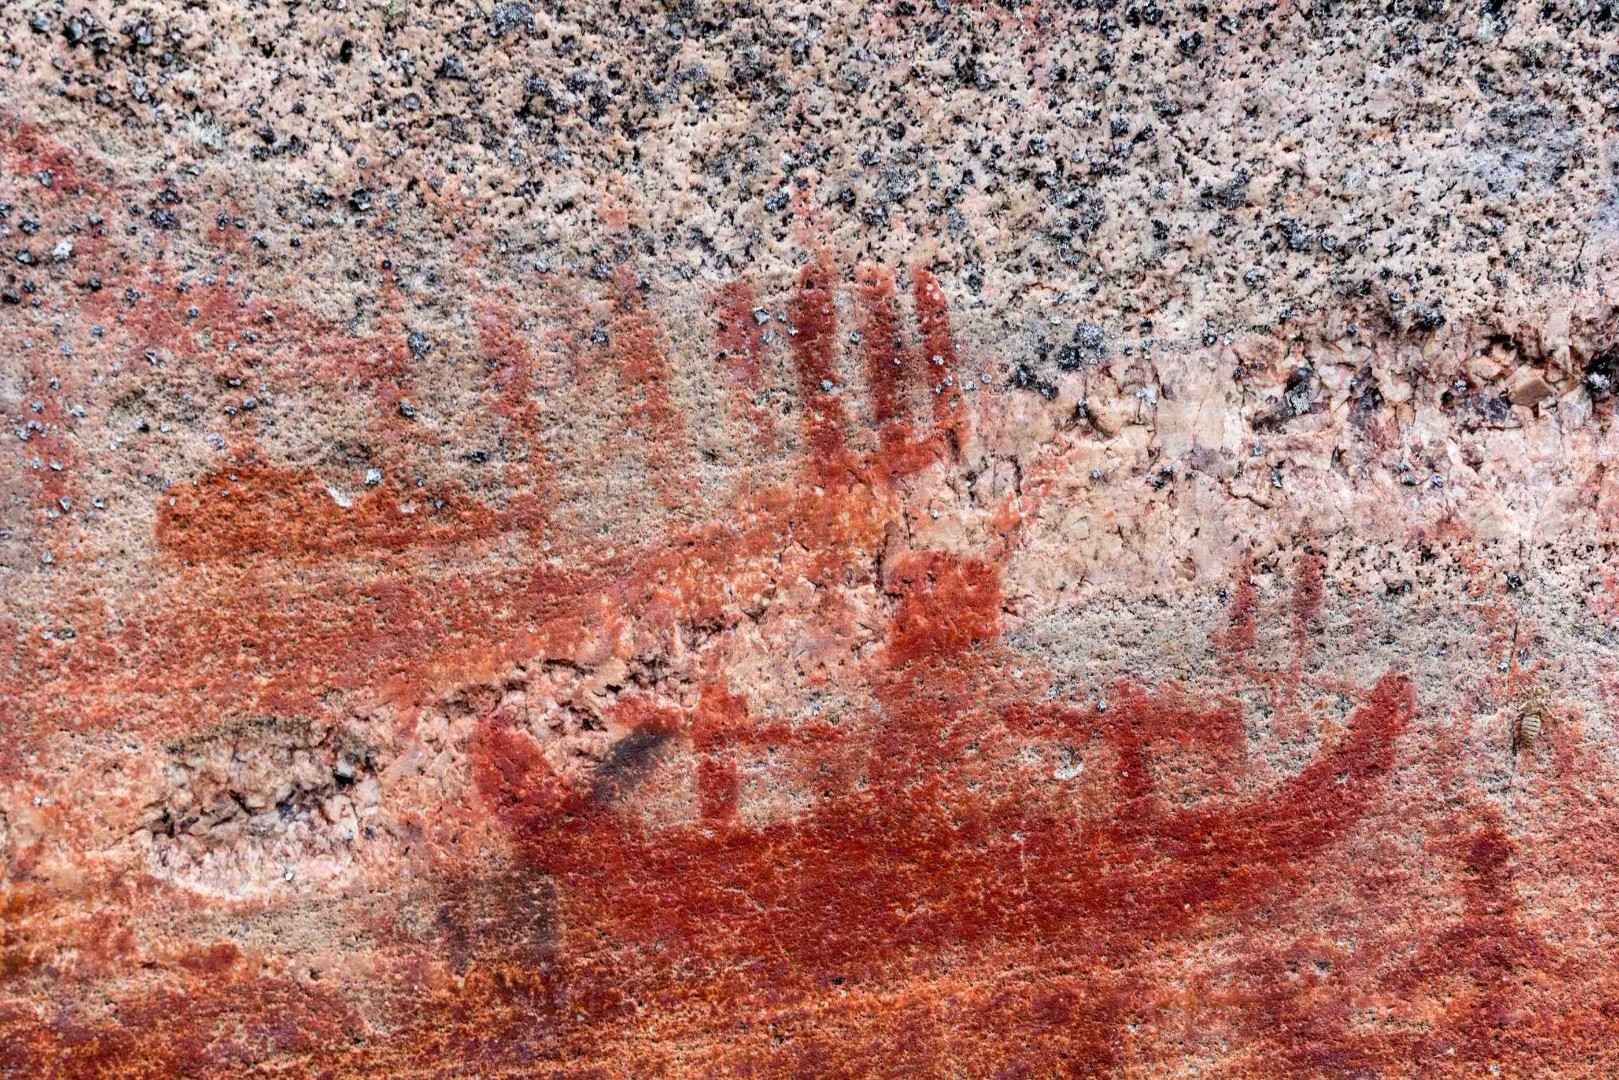 artery-lake-pictographs-face-ii-detail-canoes-and-thunderbird